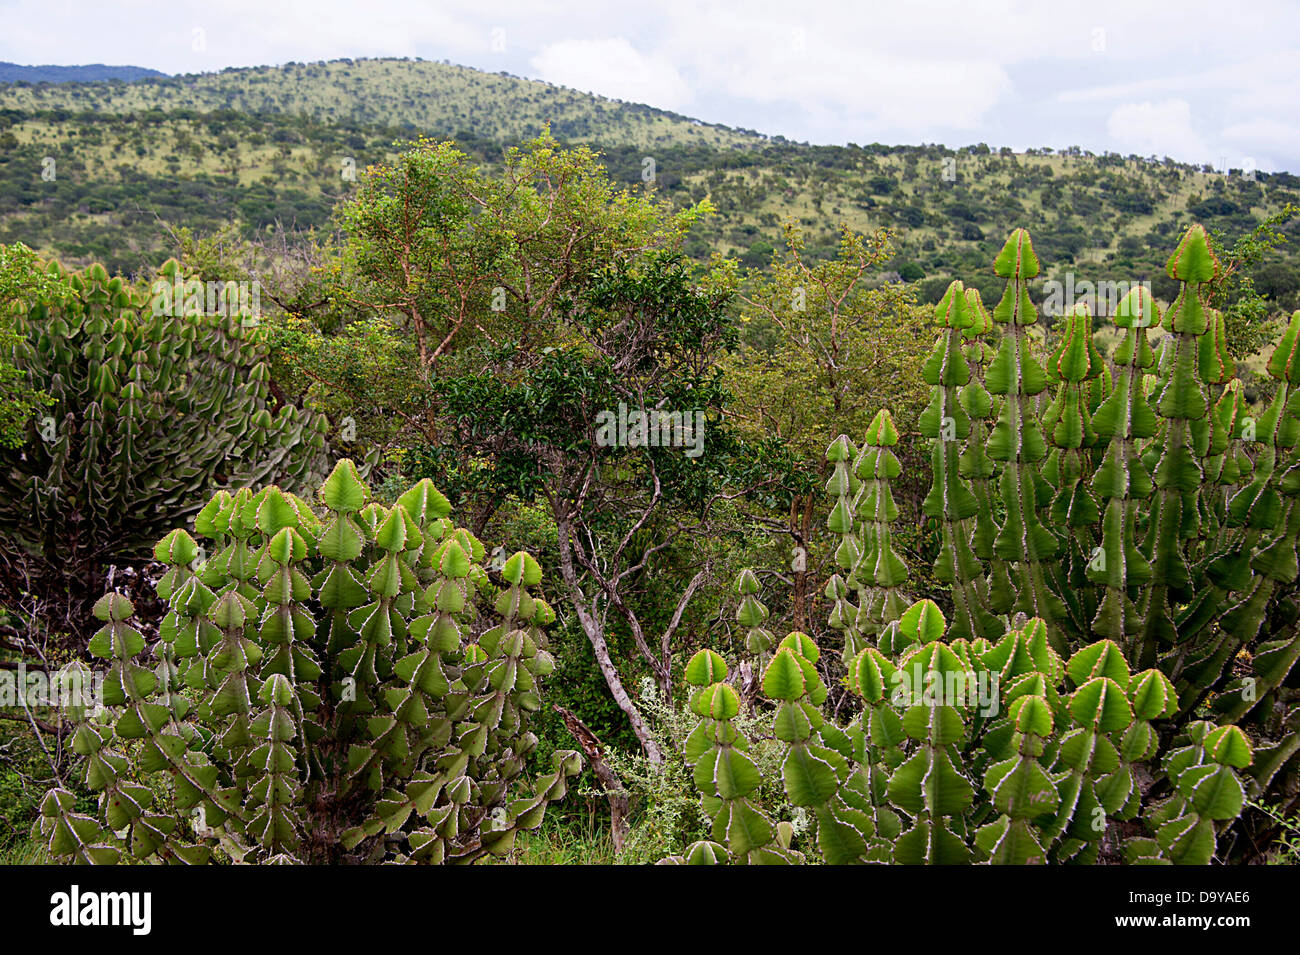 Landscape with succulent plants in the foreground. KwaZulu-Natal, South Africa. Stock Photo